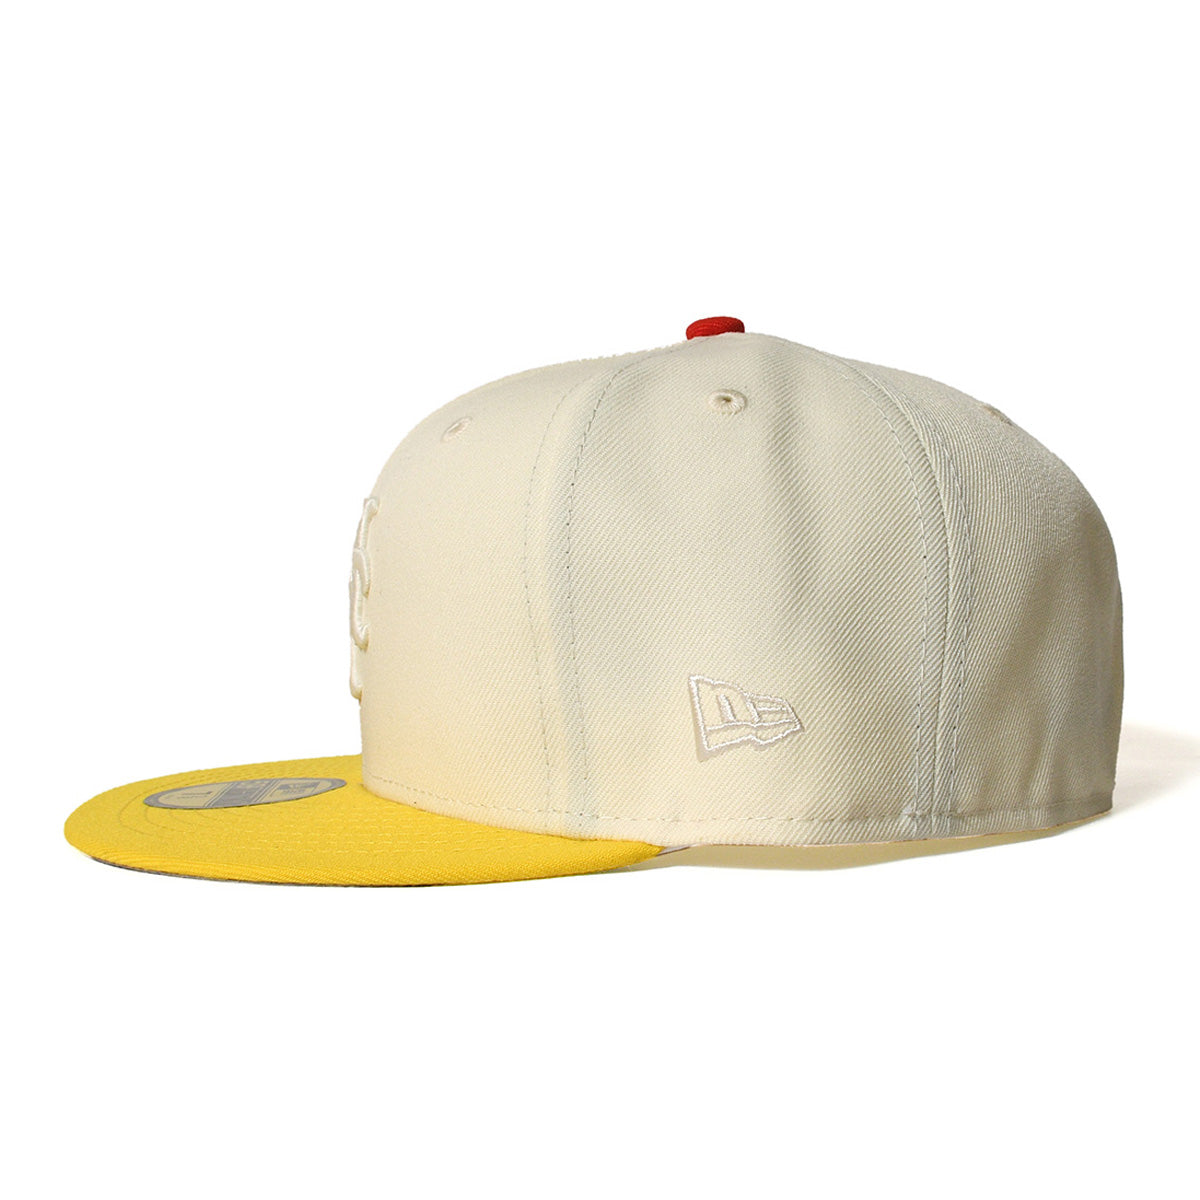 NEW ERA New York Mets - 59FIFTY 1969 LETS GO METS CHROME/CYBER YELLOW